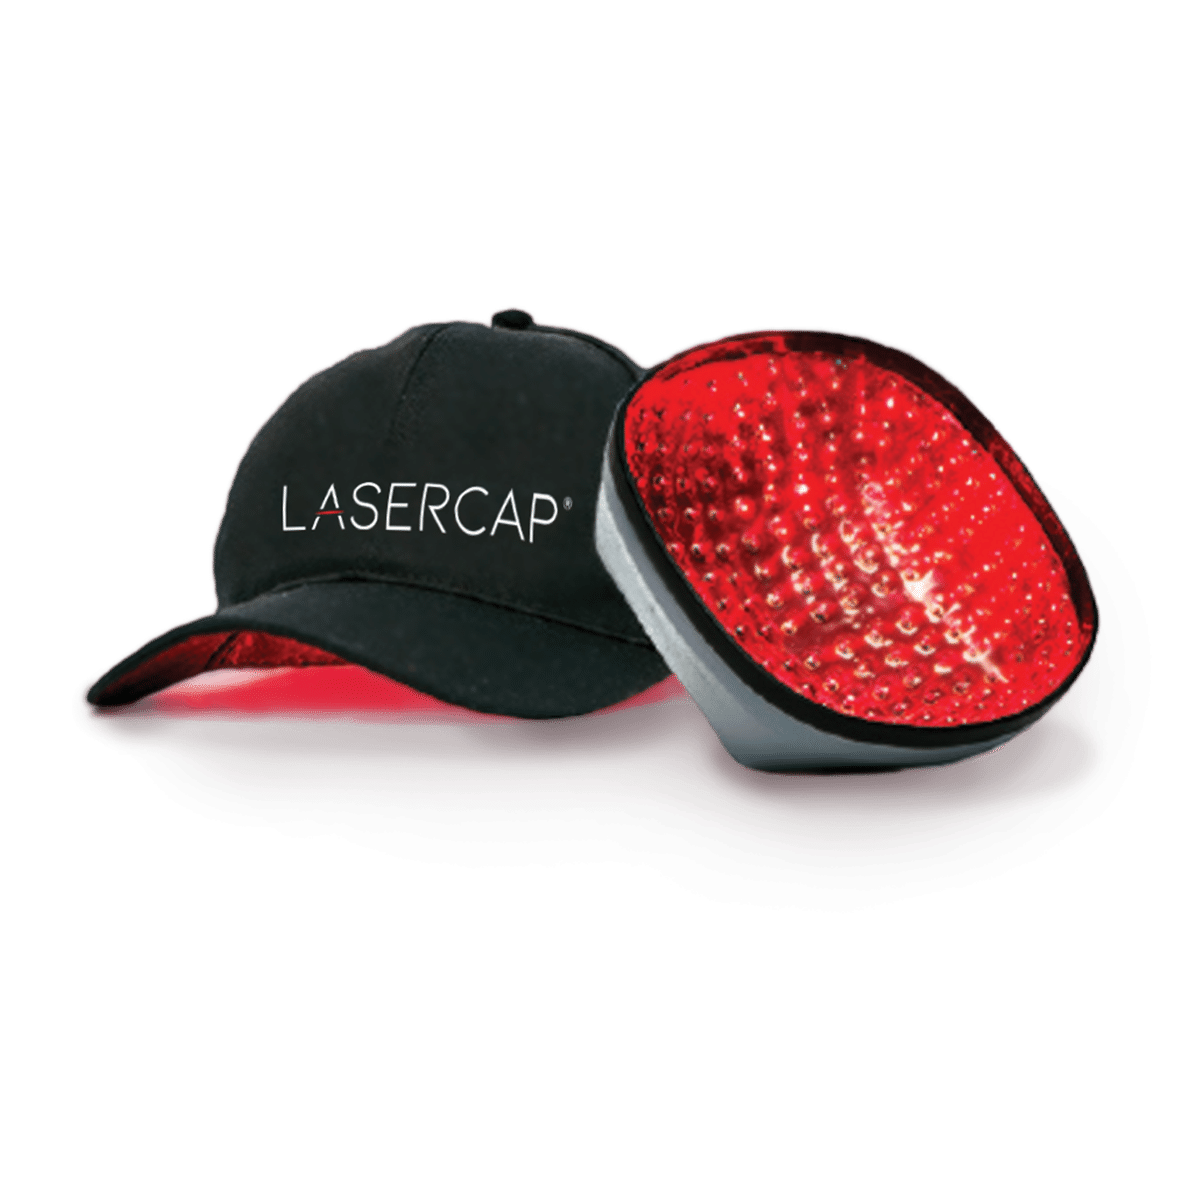 A red laser cap and a hat promoting lower level laser therapy.